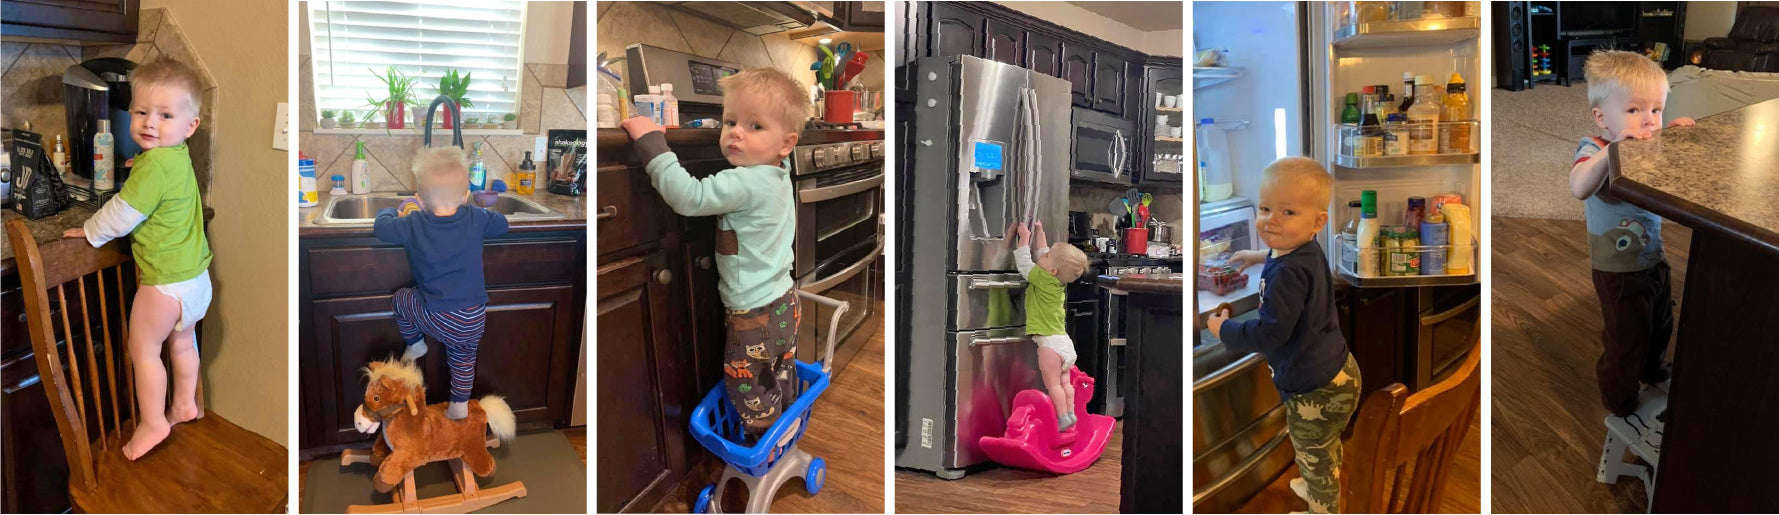 A series of images showing a toddler boy climbing on kitchen chairs, stools, rocking horses and toys so that he can reach the counter.